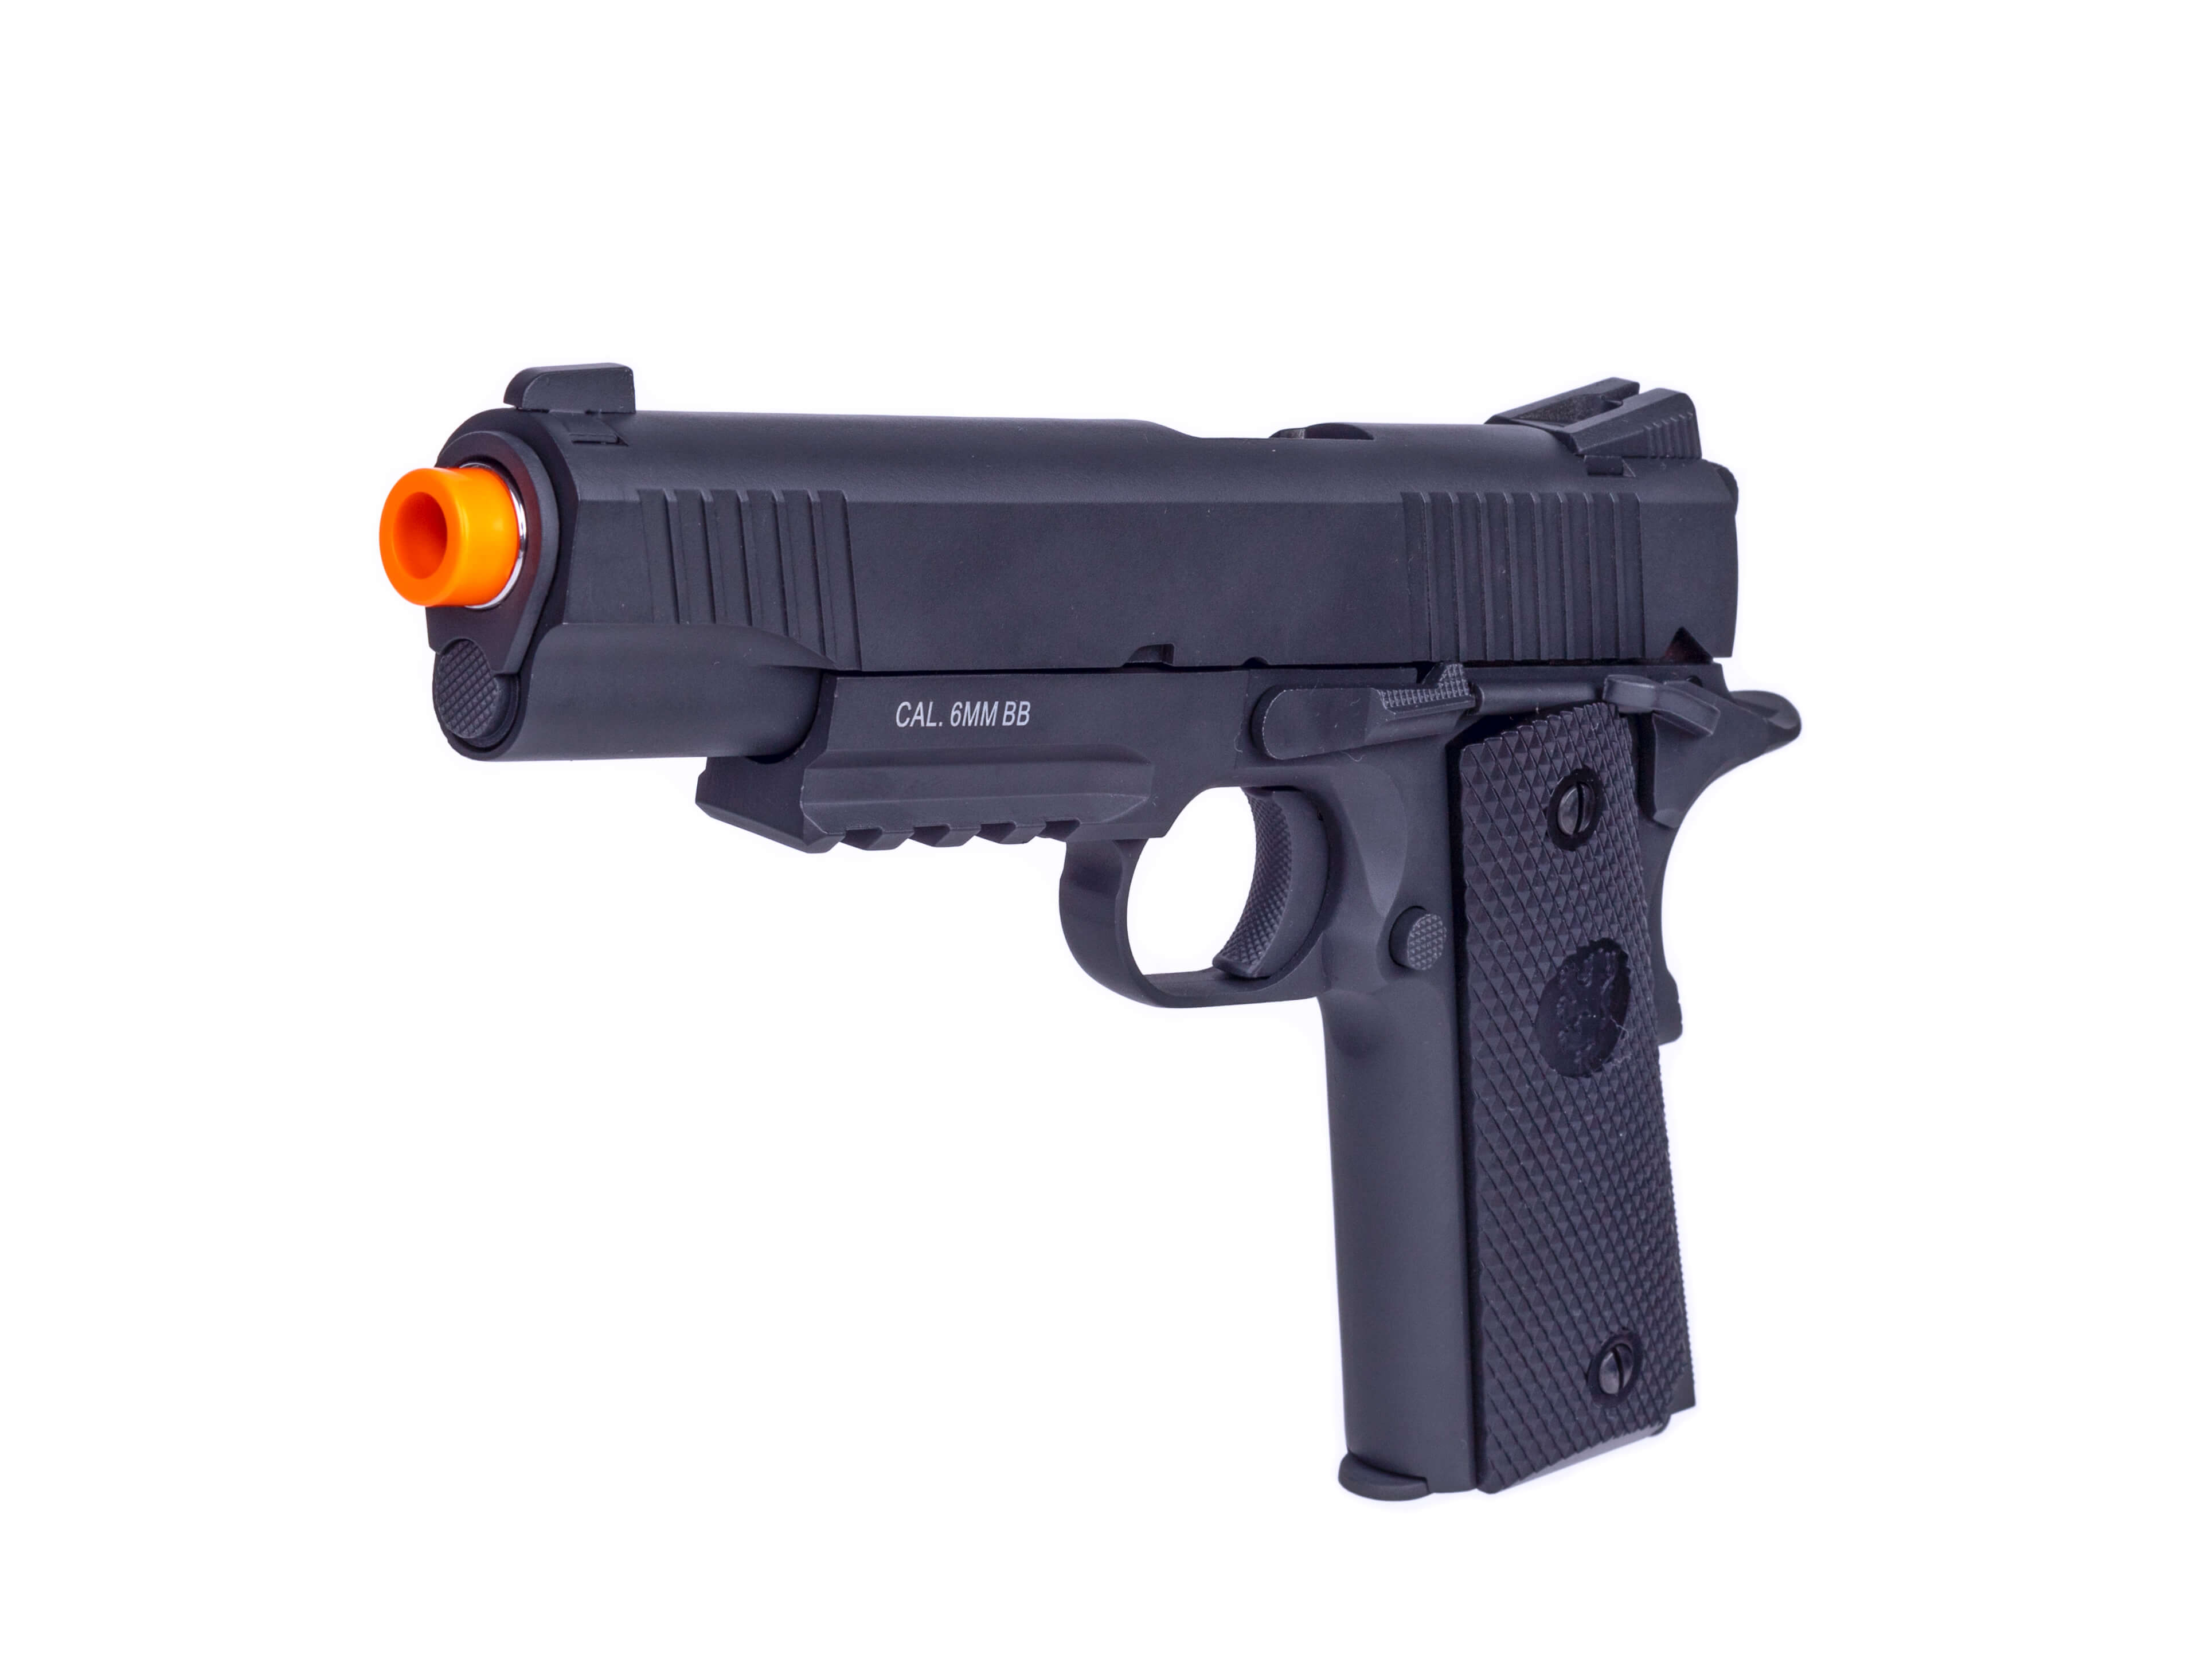 Barra Airguns 1911 CO2 Blowback Airsoft Pistol at Tractor Supply Co.